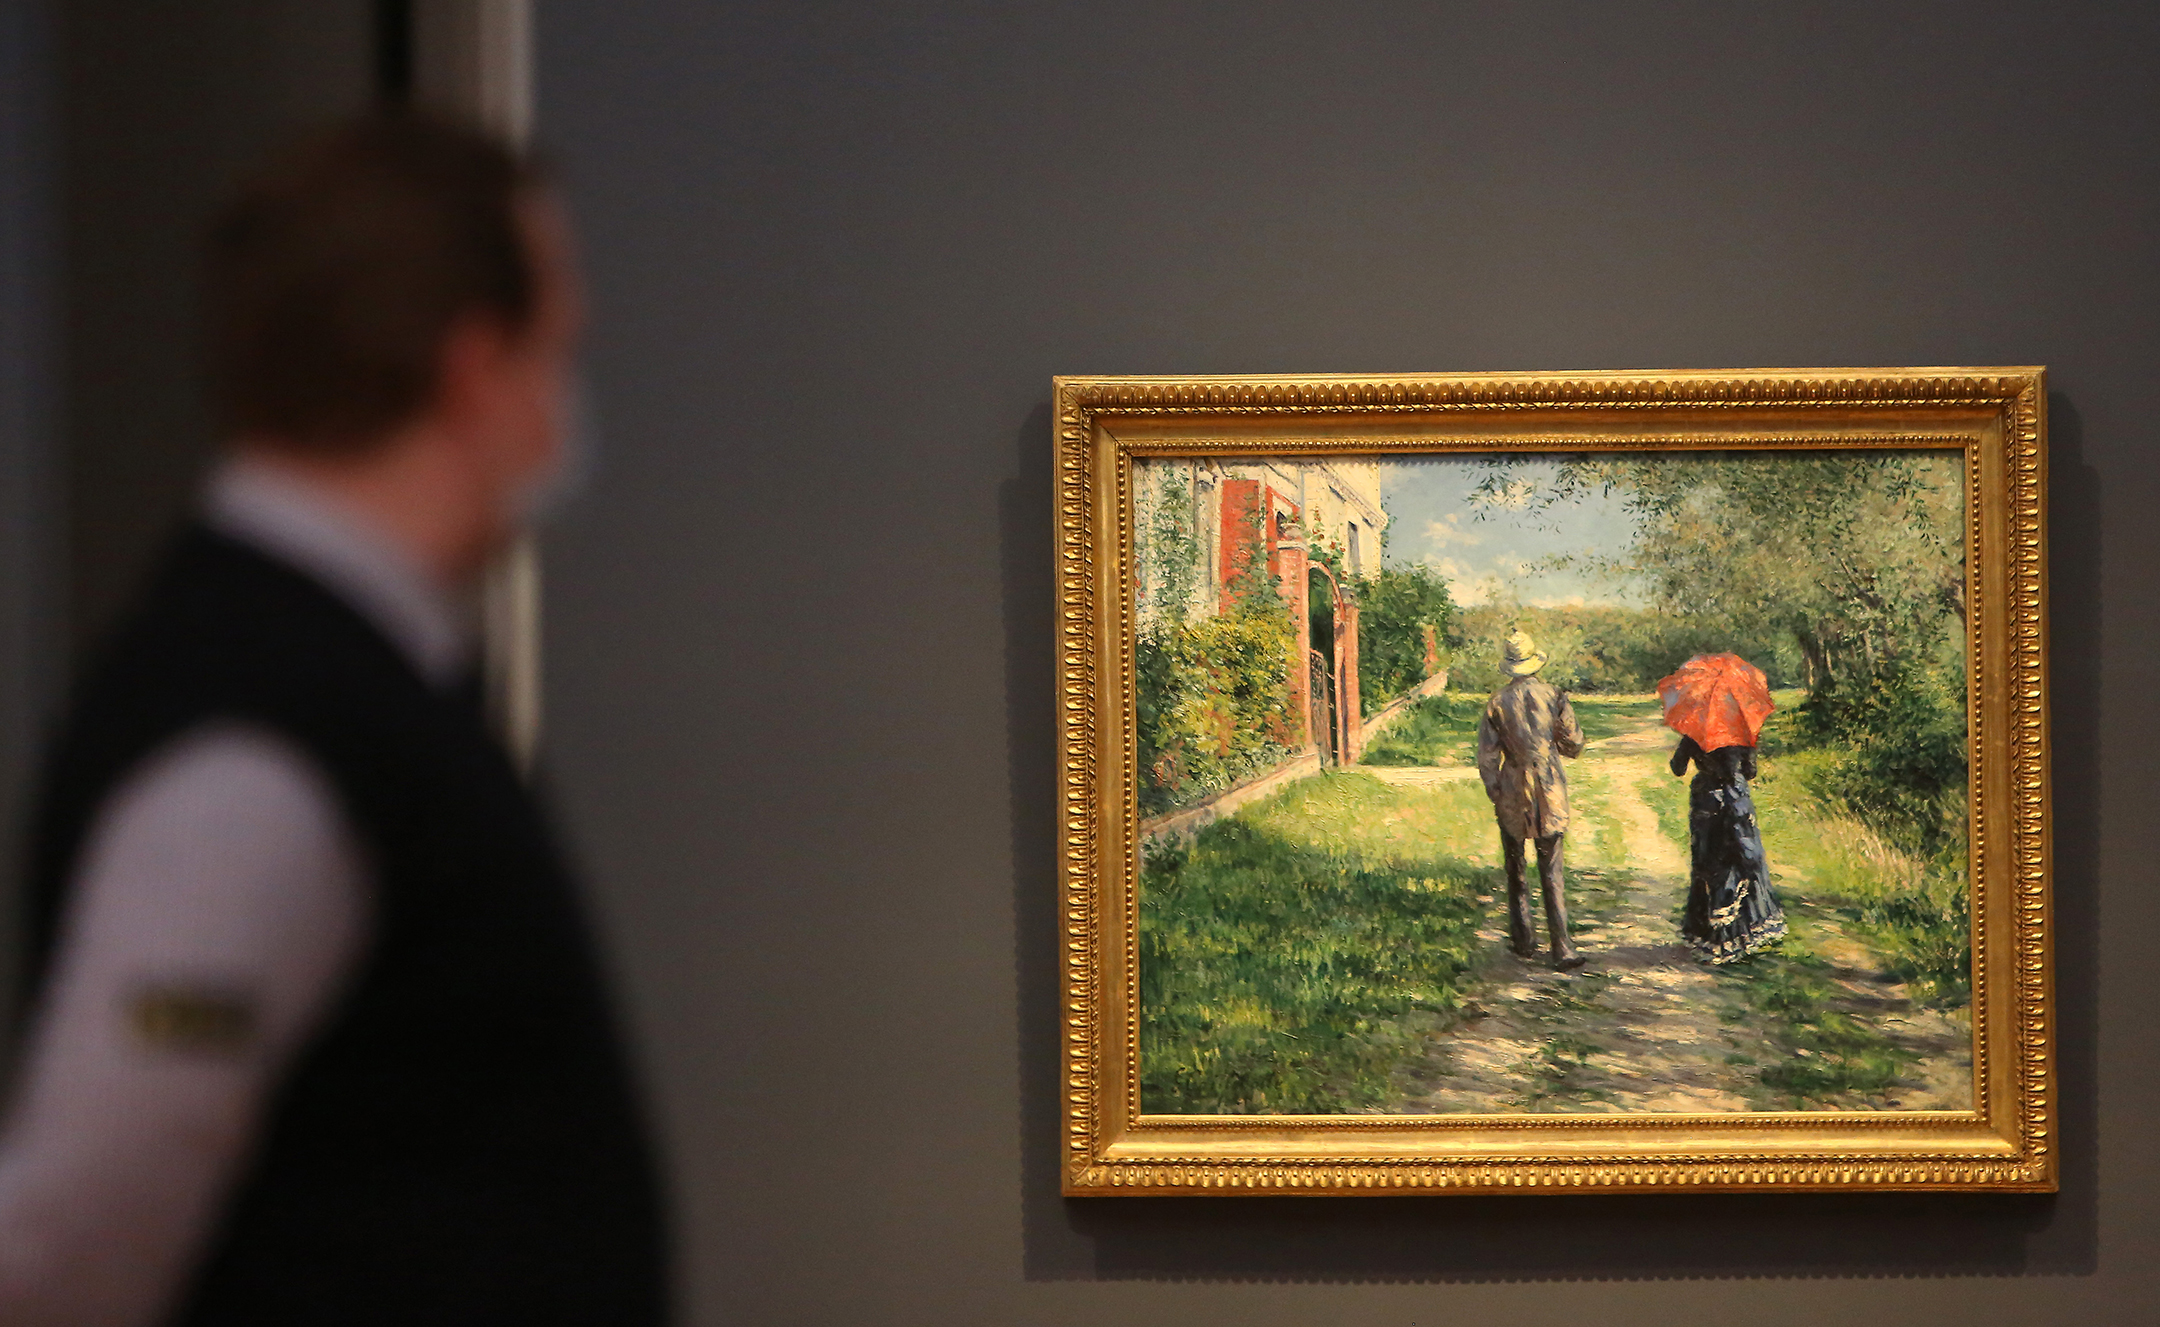 A security guard looks at a painting at Museum Barberini in Potsdam, Germany.